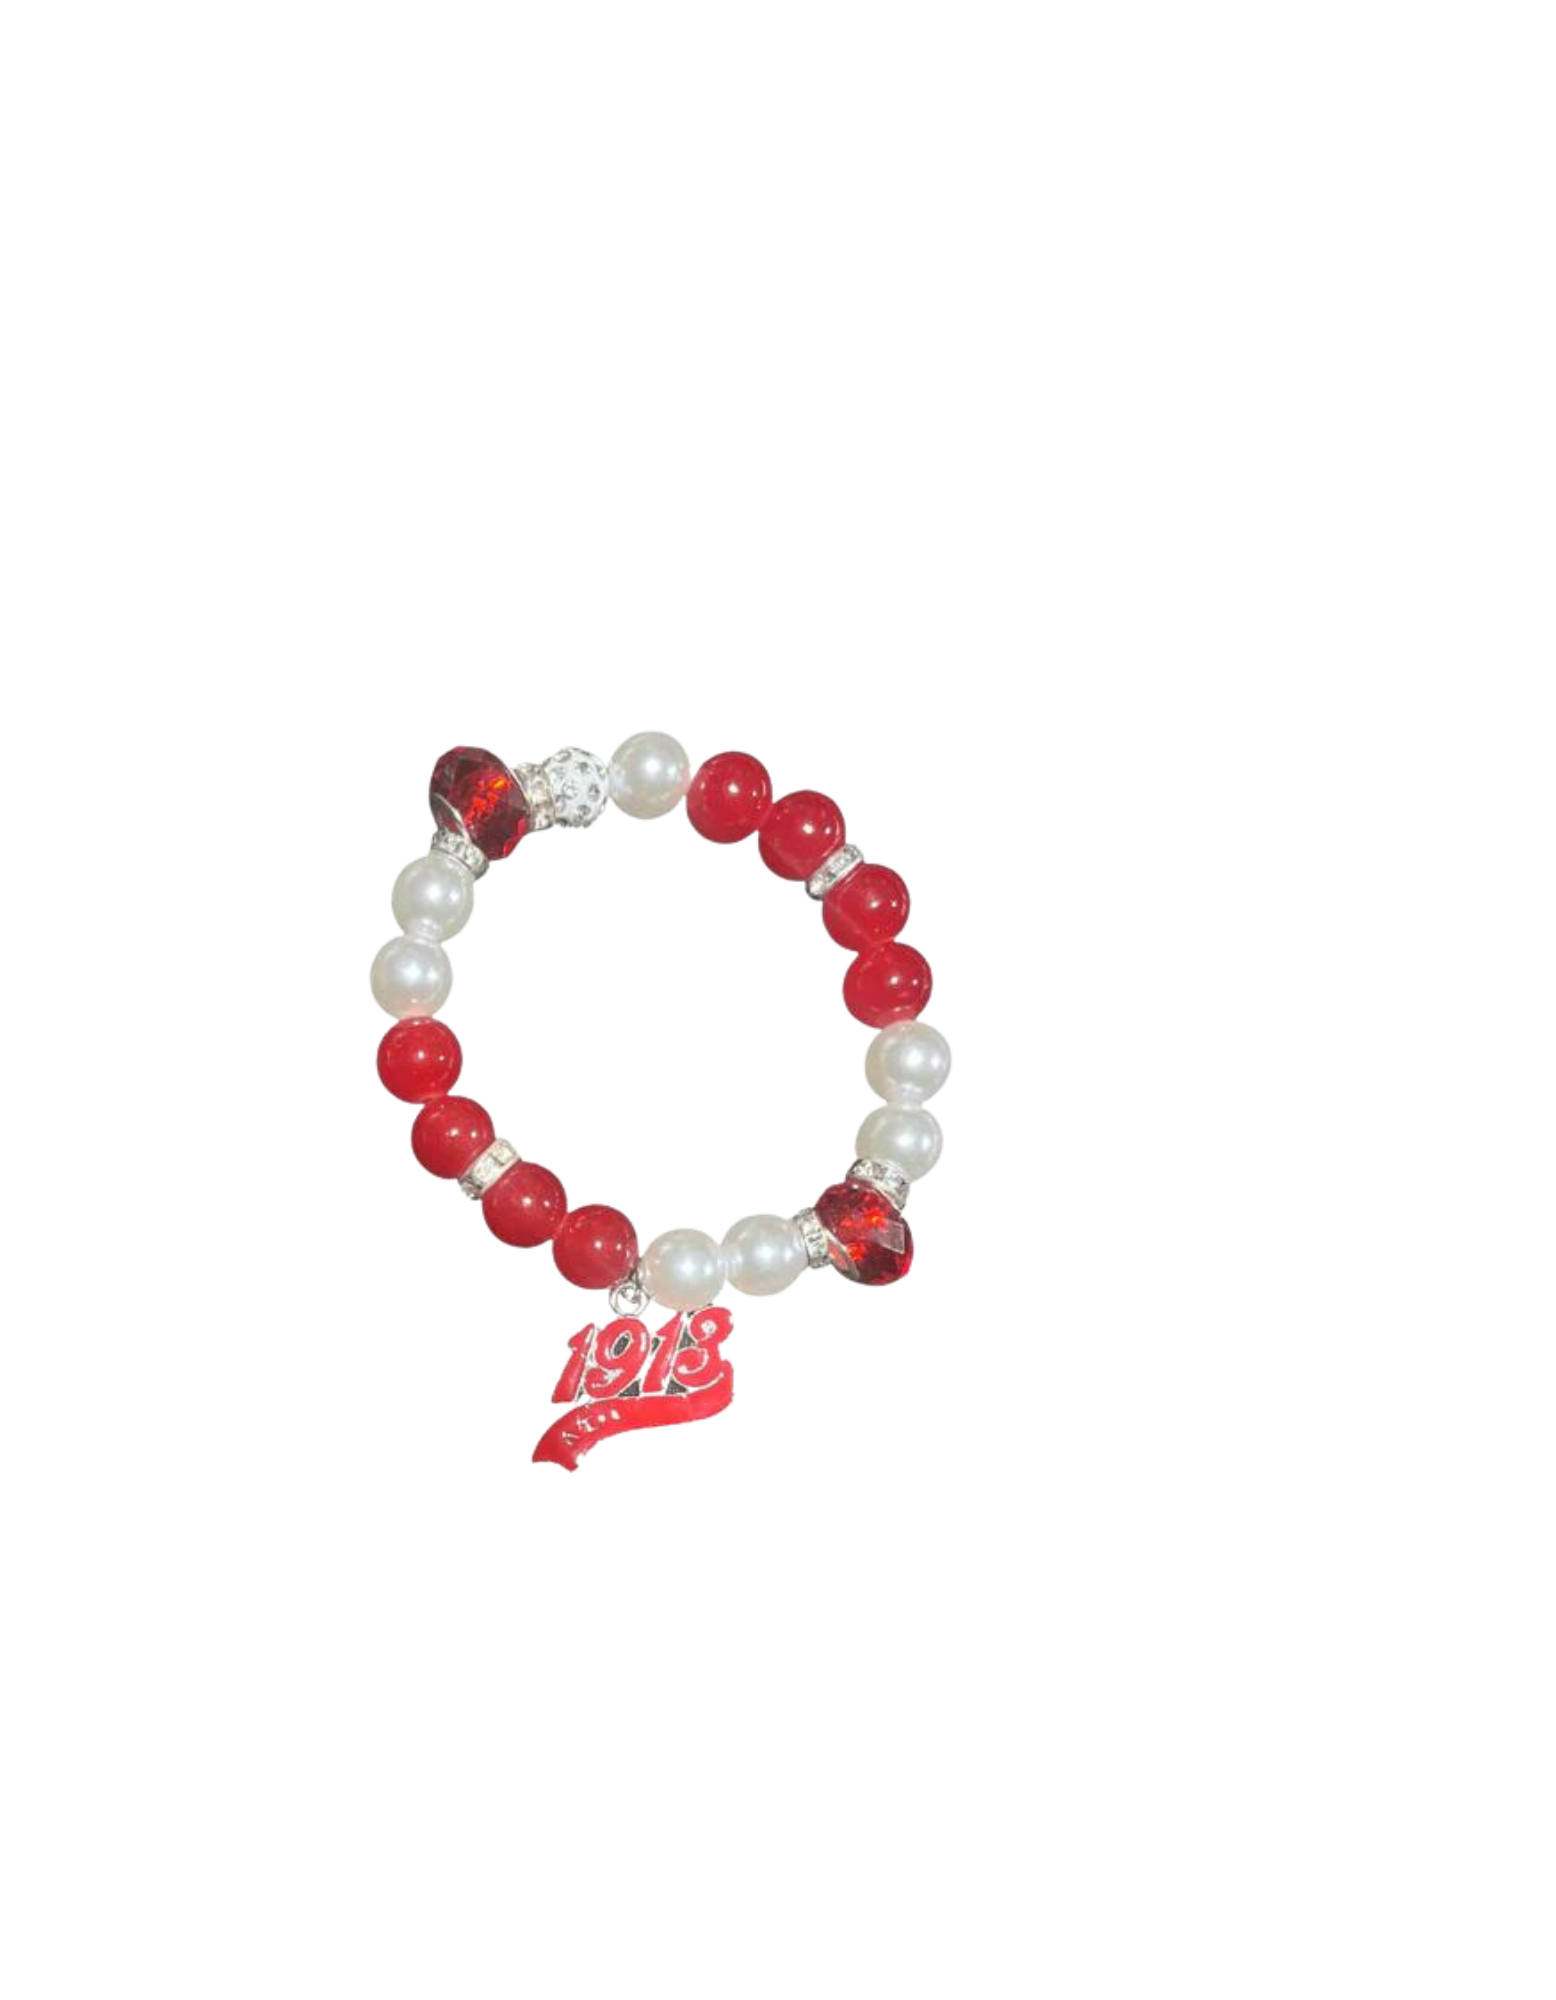 1913 Red bead and Ivory Pearl Stretch Bracelet